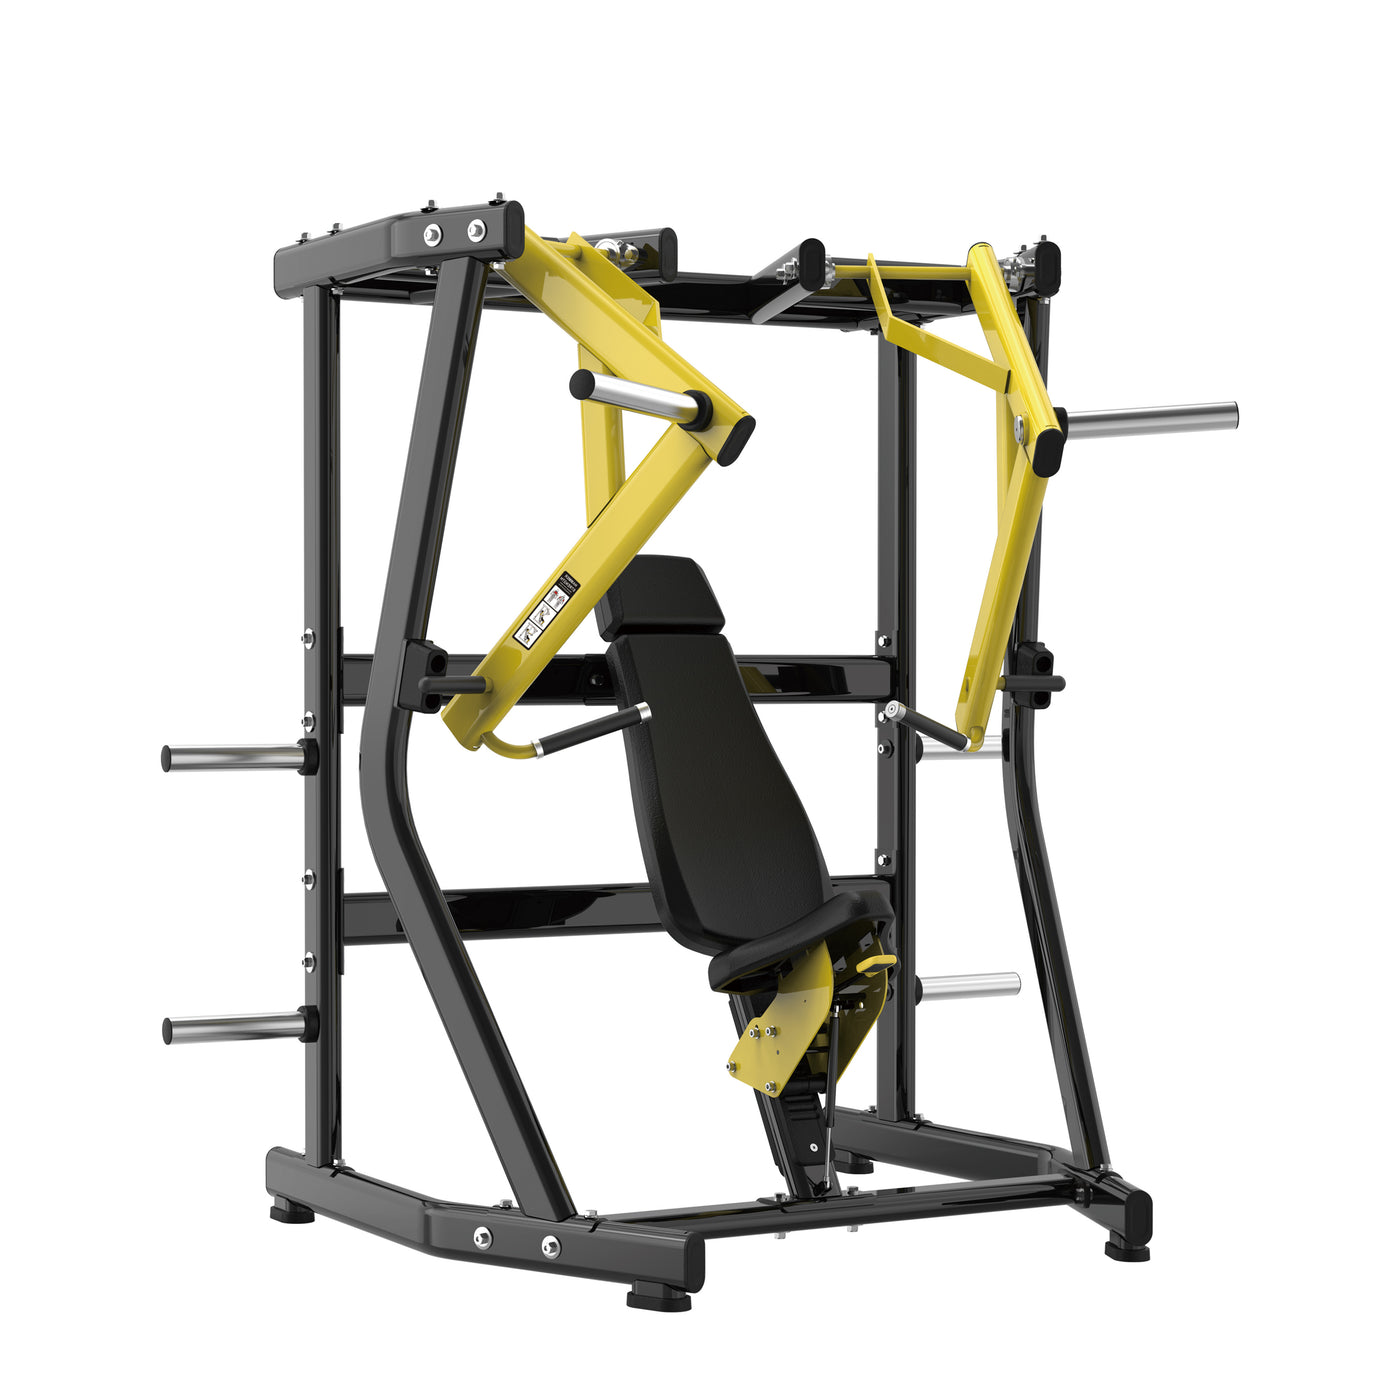 IFN 26 SEATED CHEST PRESS